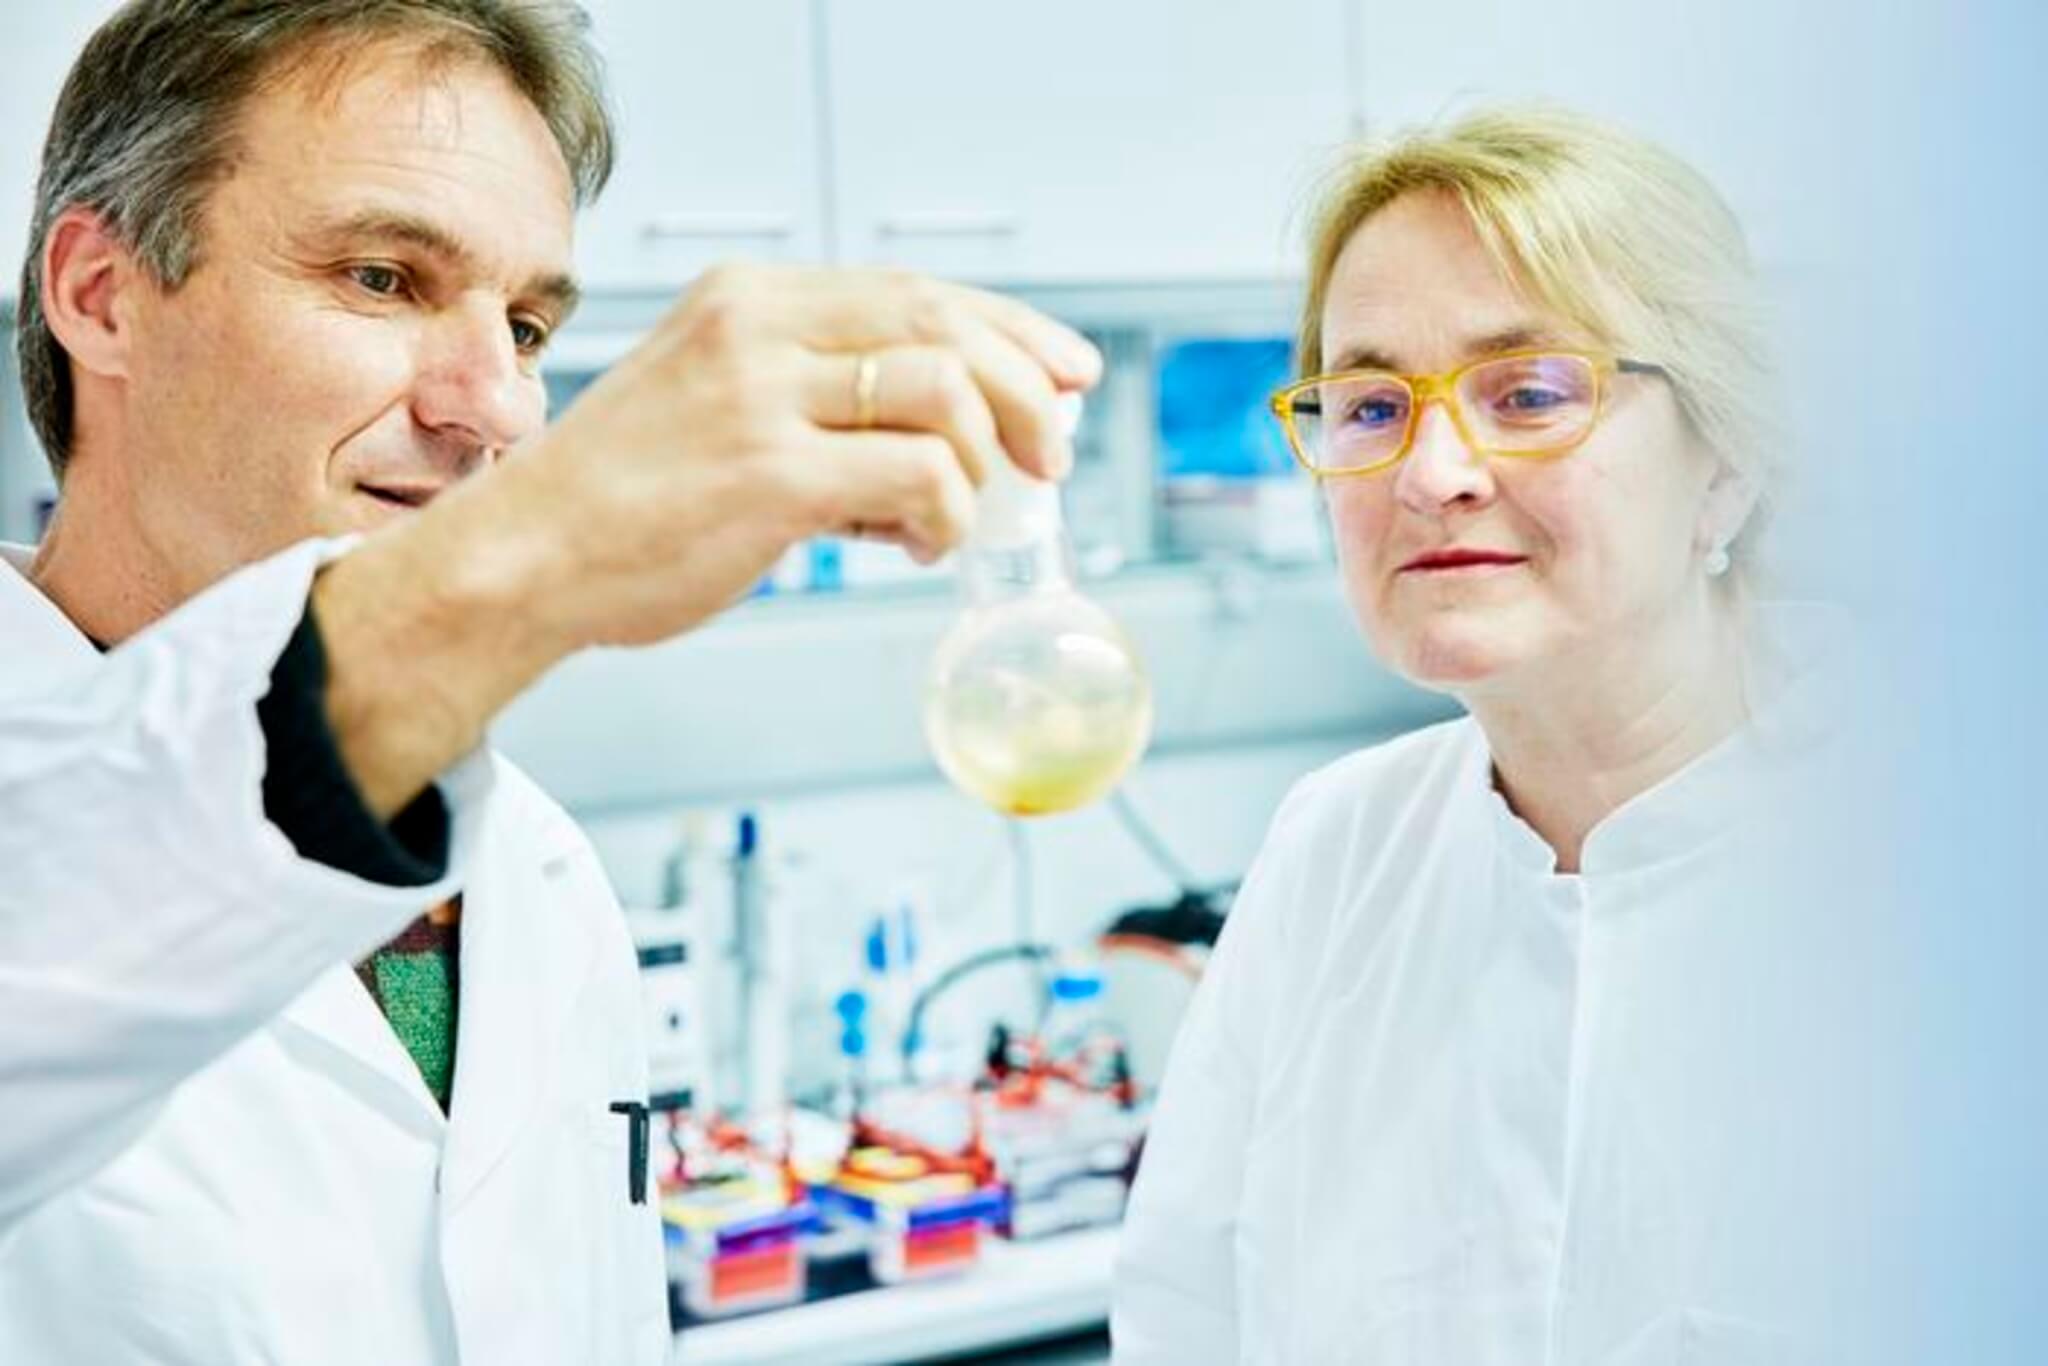 Dr. Bernhard Krismer and Professor Stephanie Grond in the microbiology laboratory of the University of Tübingen’s Interfaculty Institute of Microbiology and Infection Medicine Tübingen (IMIT). With their teams they worked on the discovery of the active substance epifadin